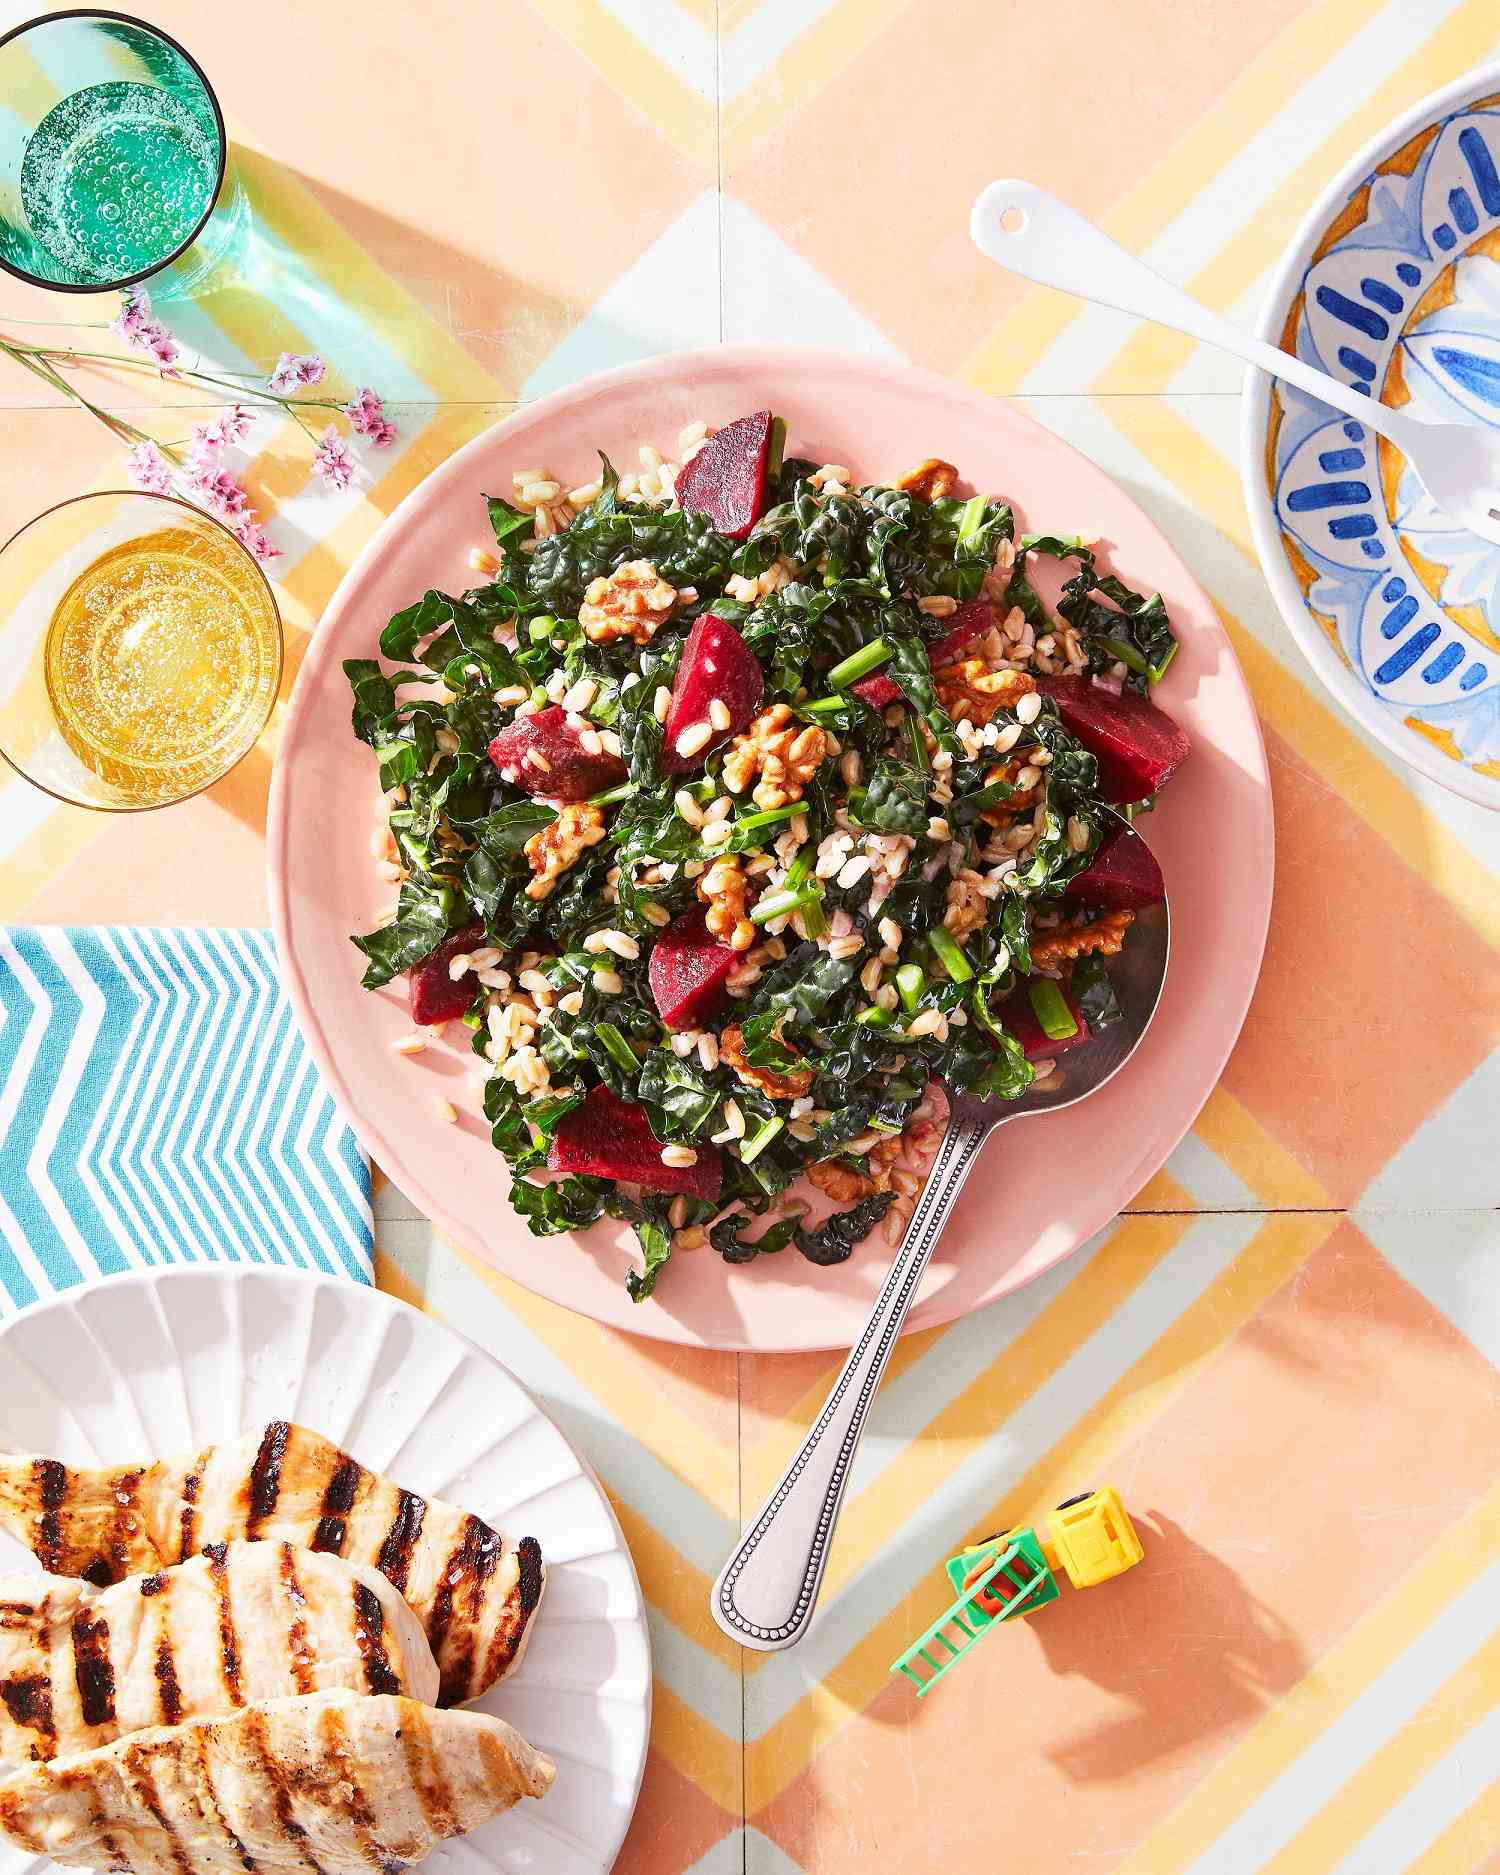 Farro Salad with Kale, Beets, and Candied Walnuts